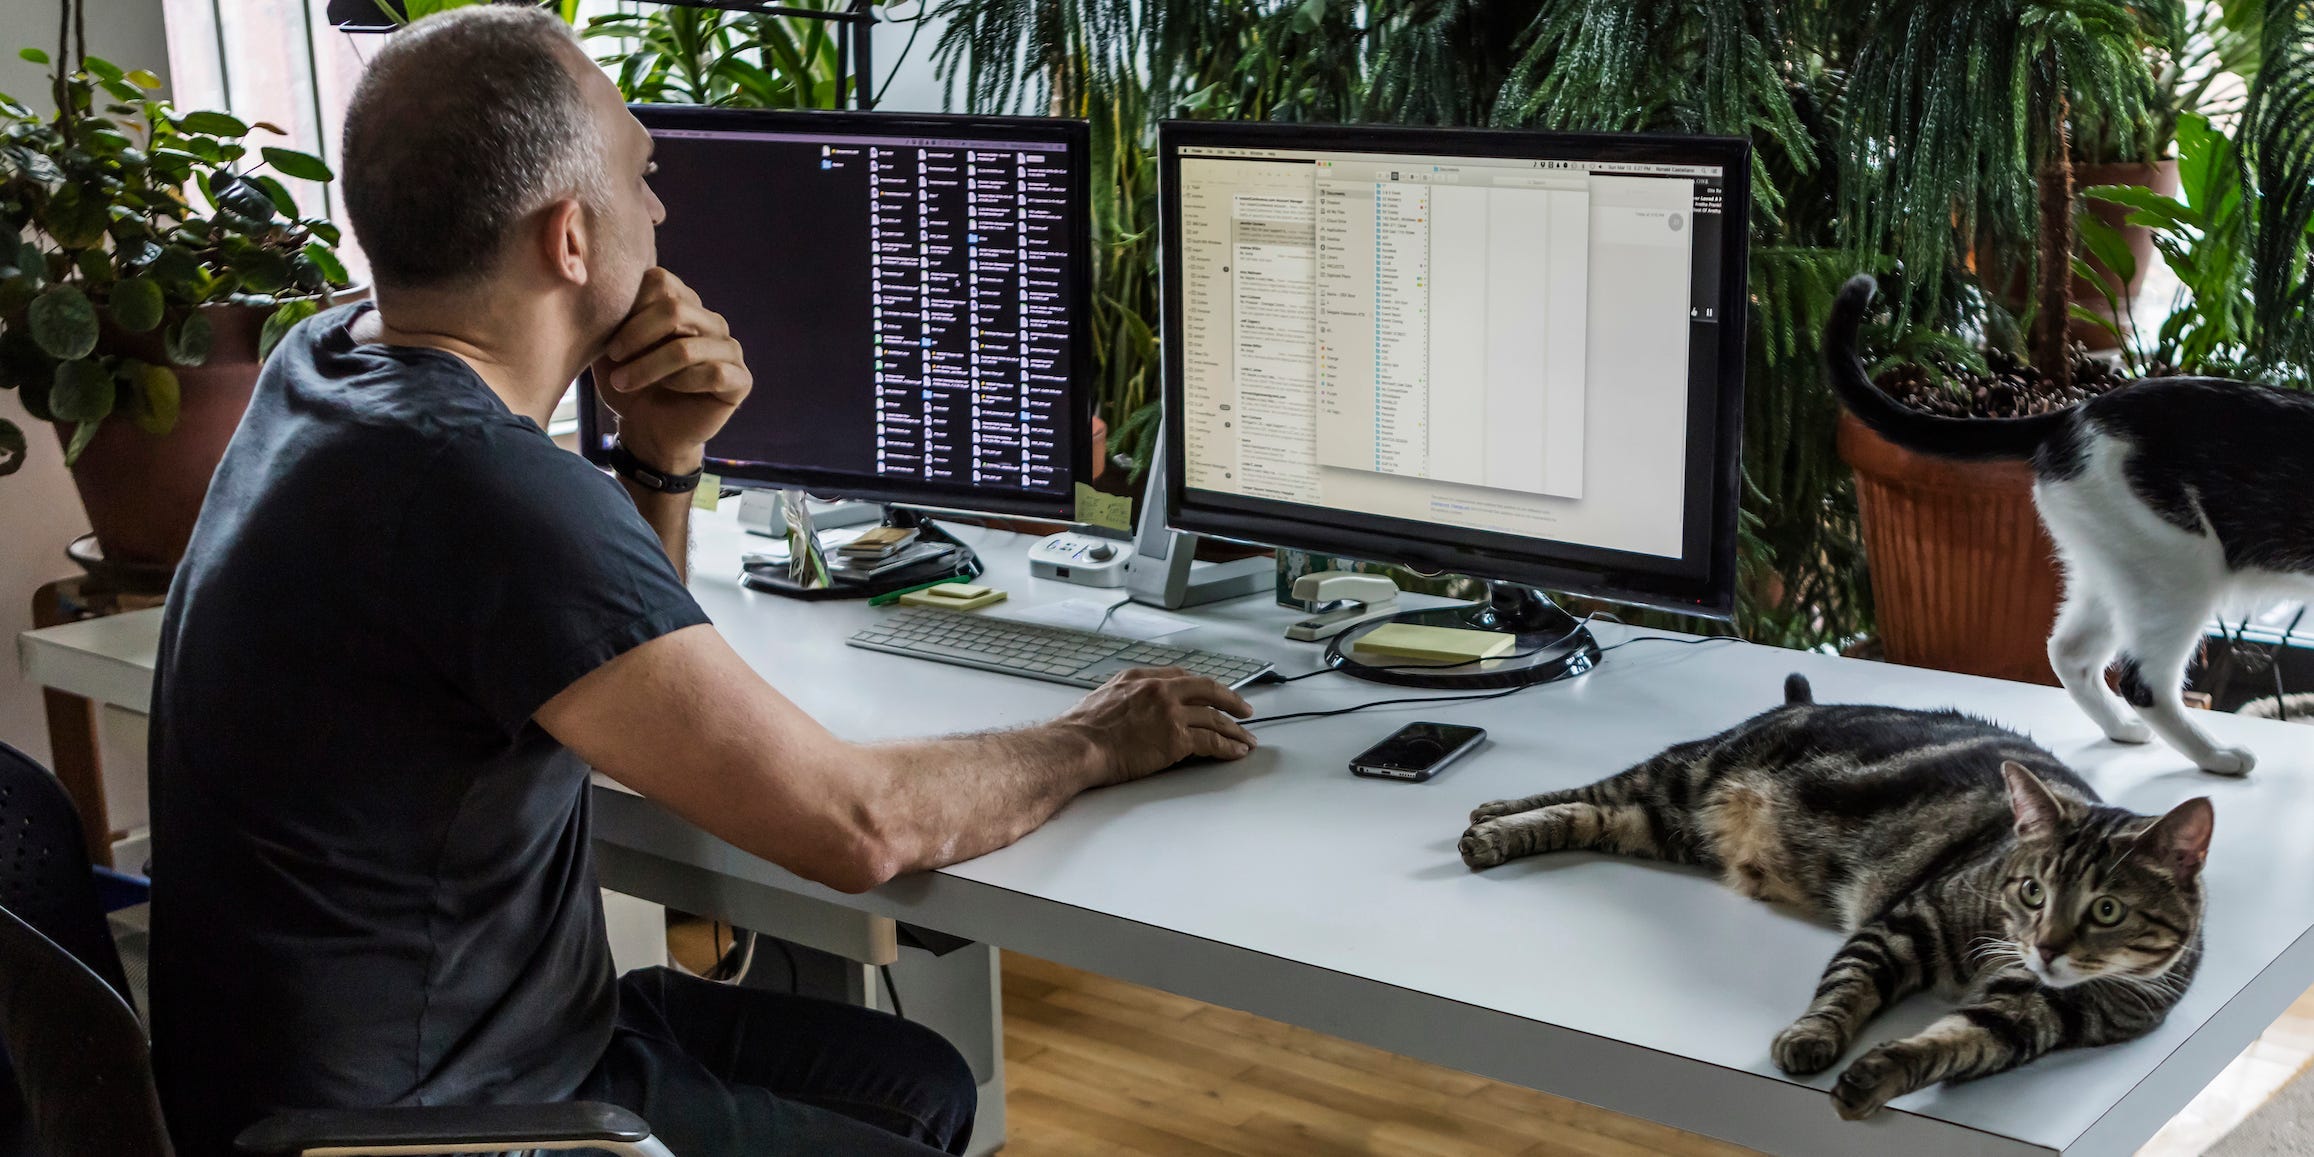 A man using two computer monitors while surrounded by plants and cats.